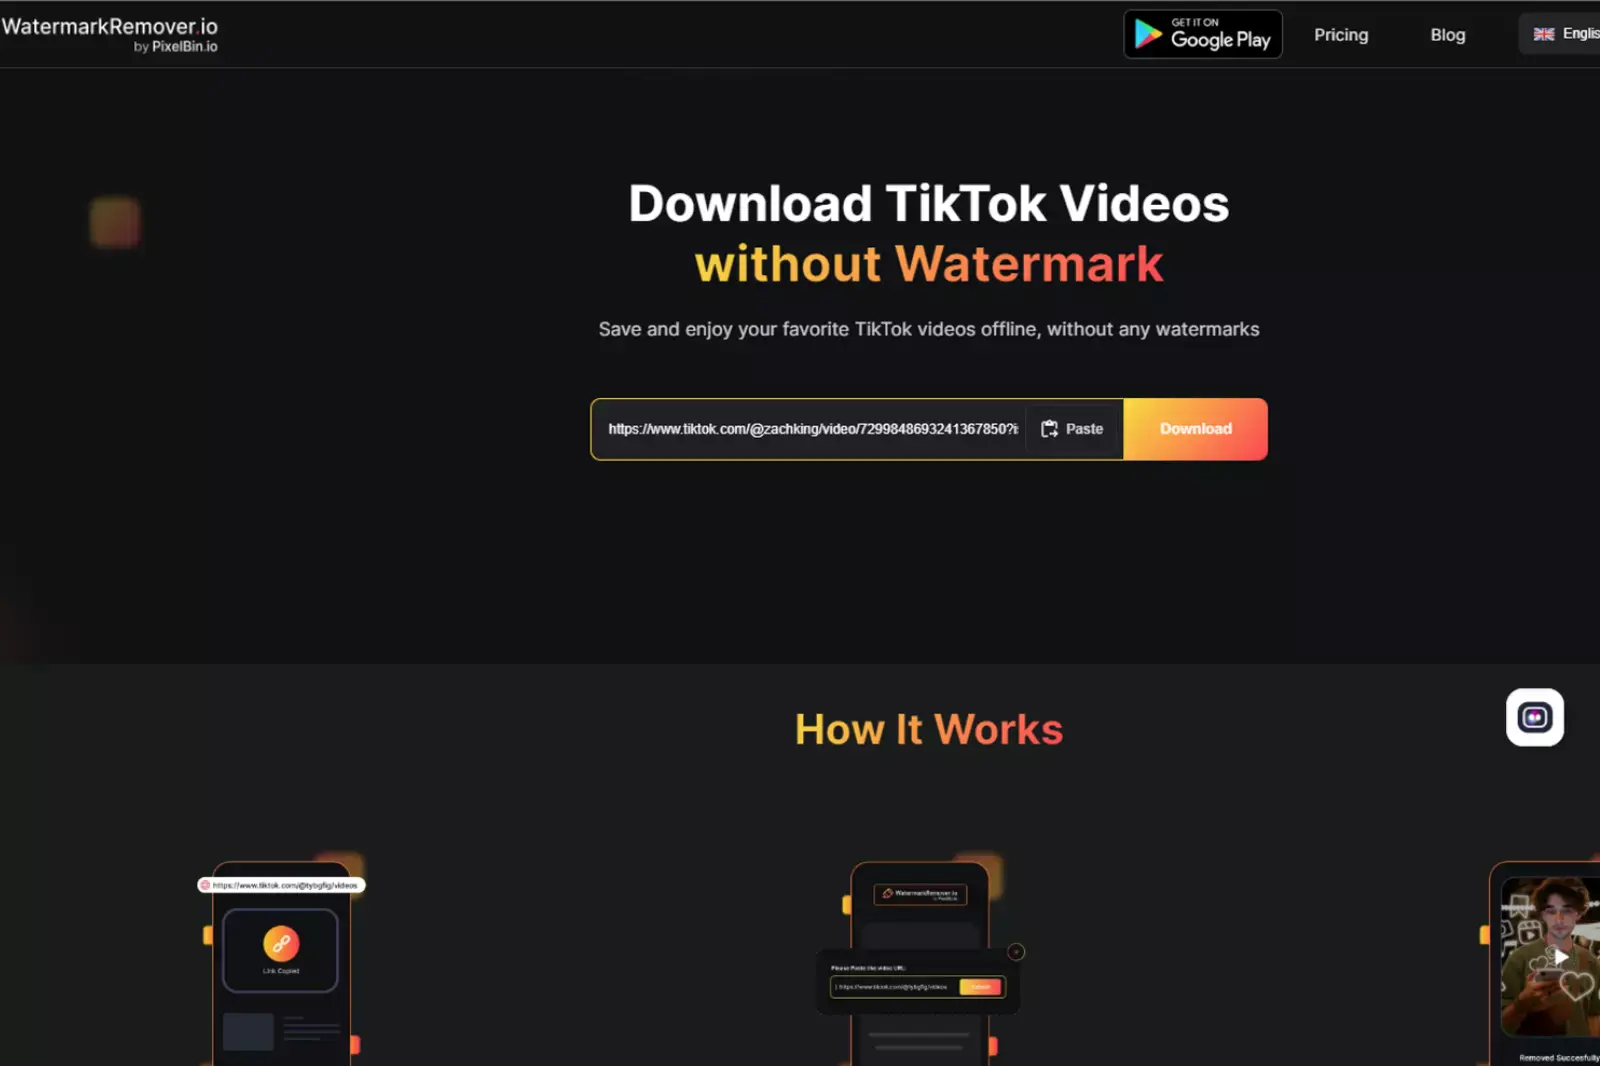 Insert the link of your TikTok video into the provided space.